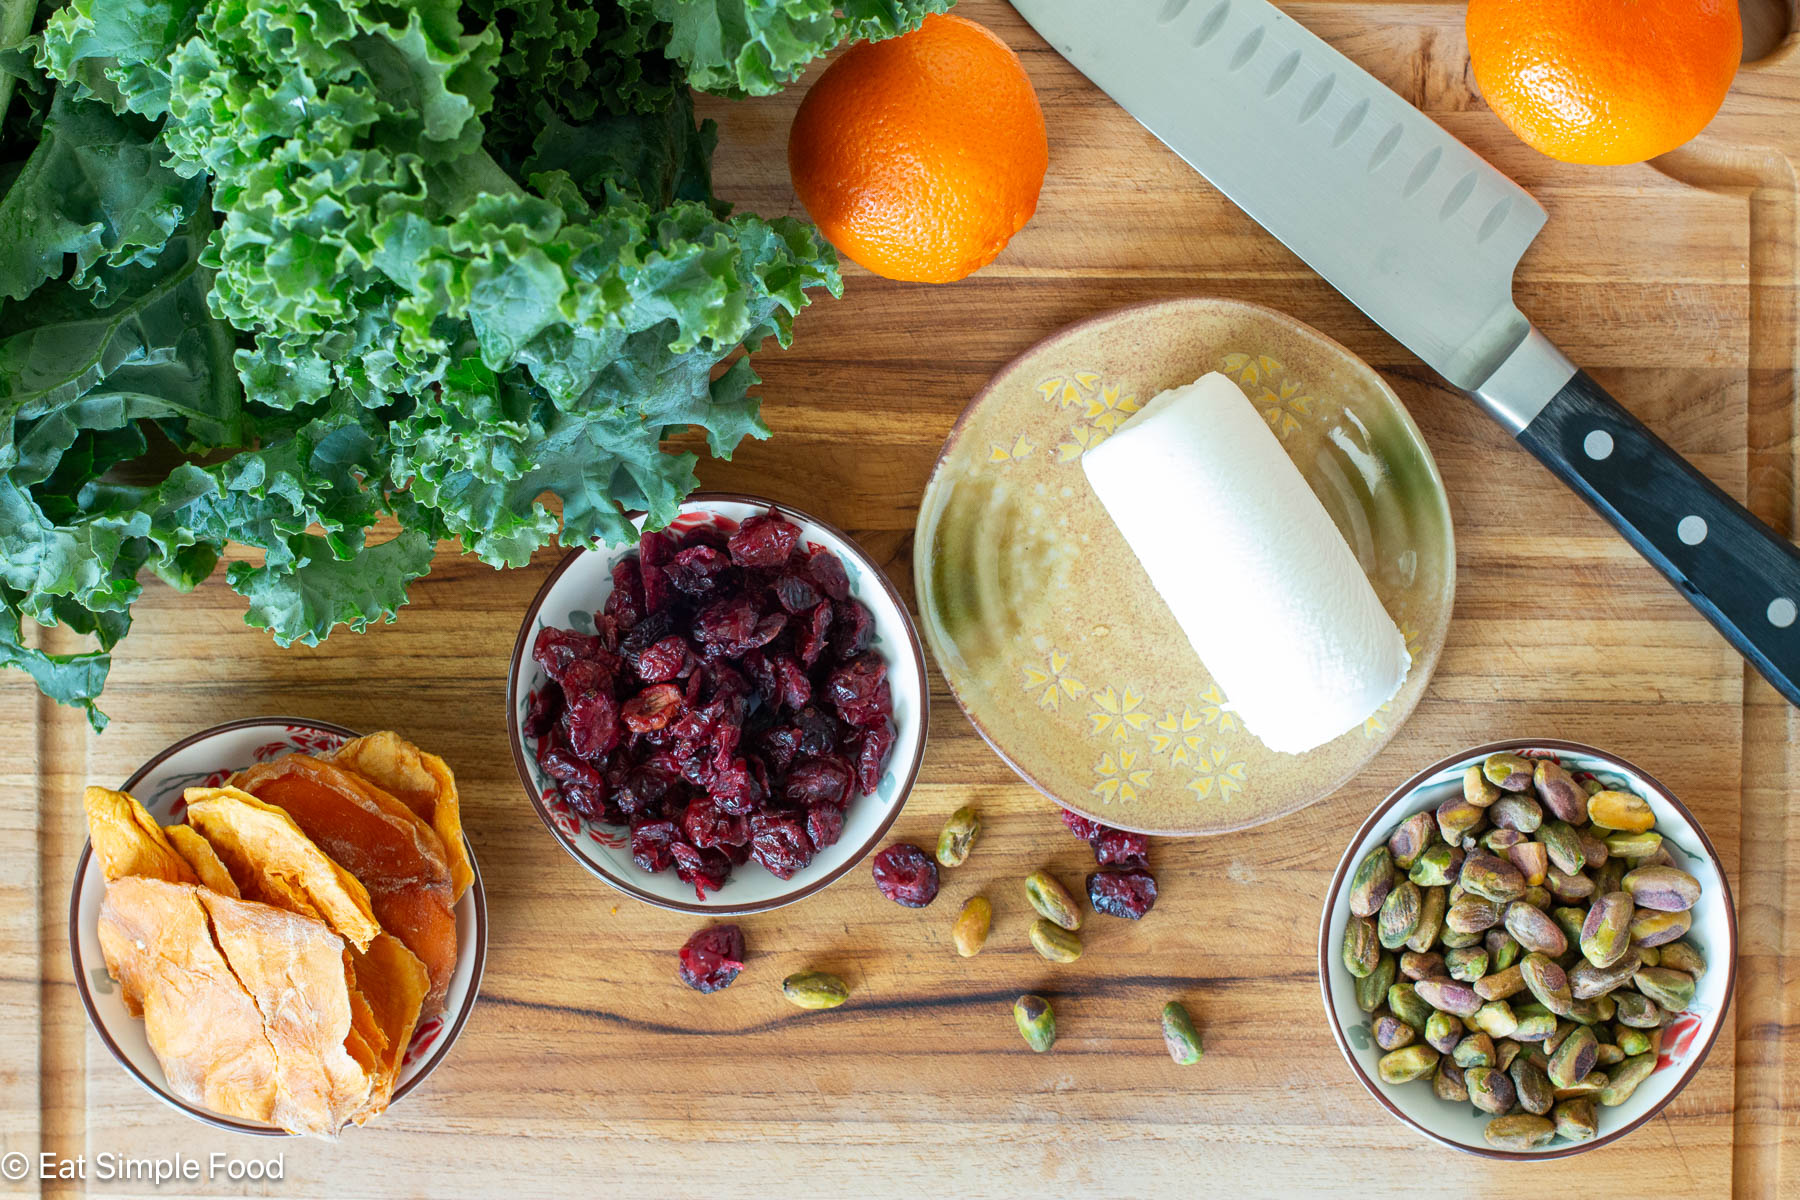 Ingredients on a wood cutting board with a knife. Cranberries. dried mango slices, whole pistachios, a log of goat cheese, 2 oranges, and a head of kale.